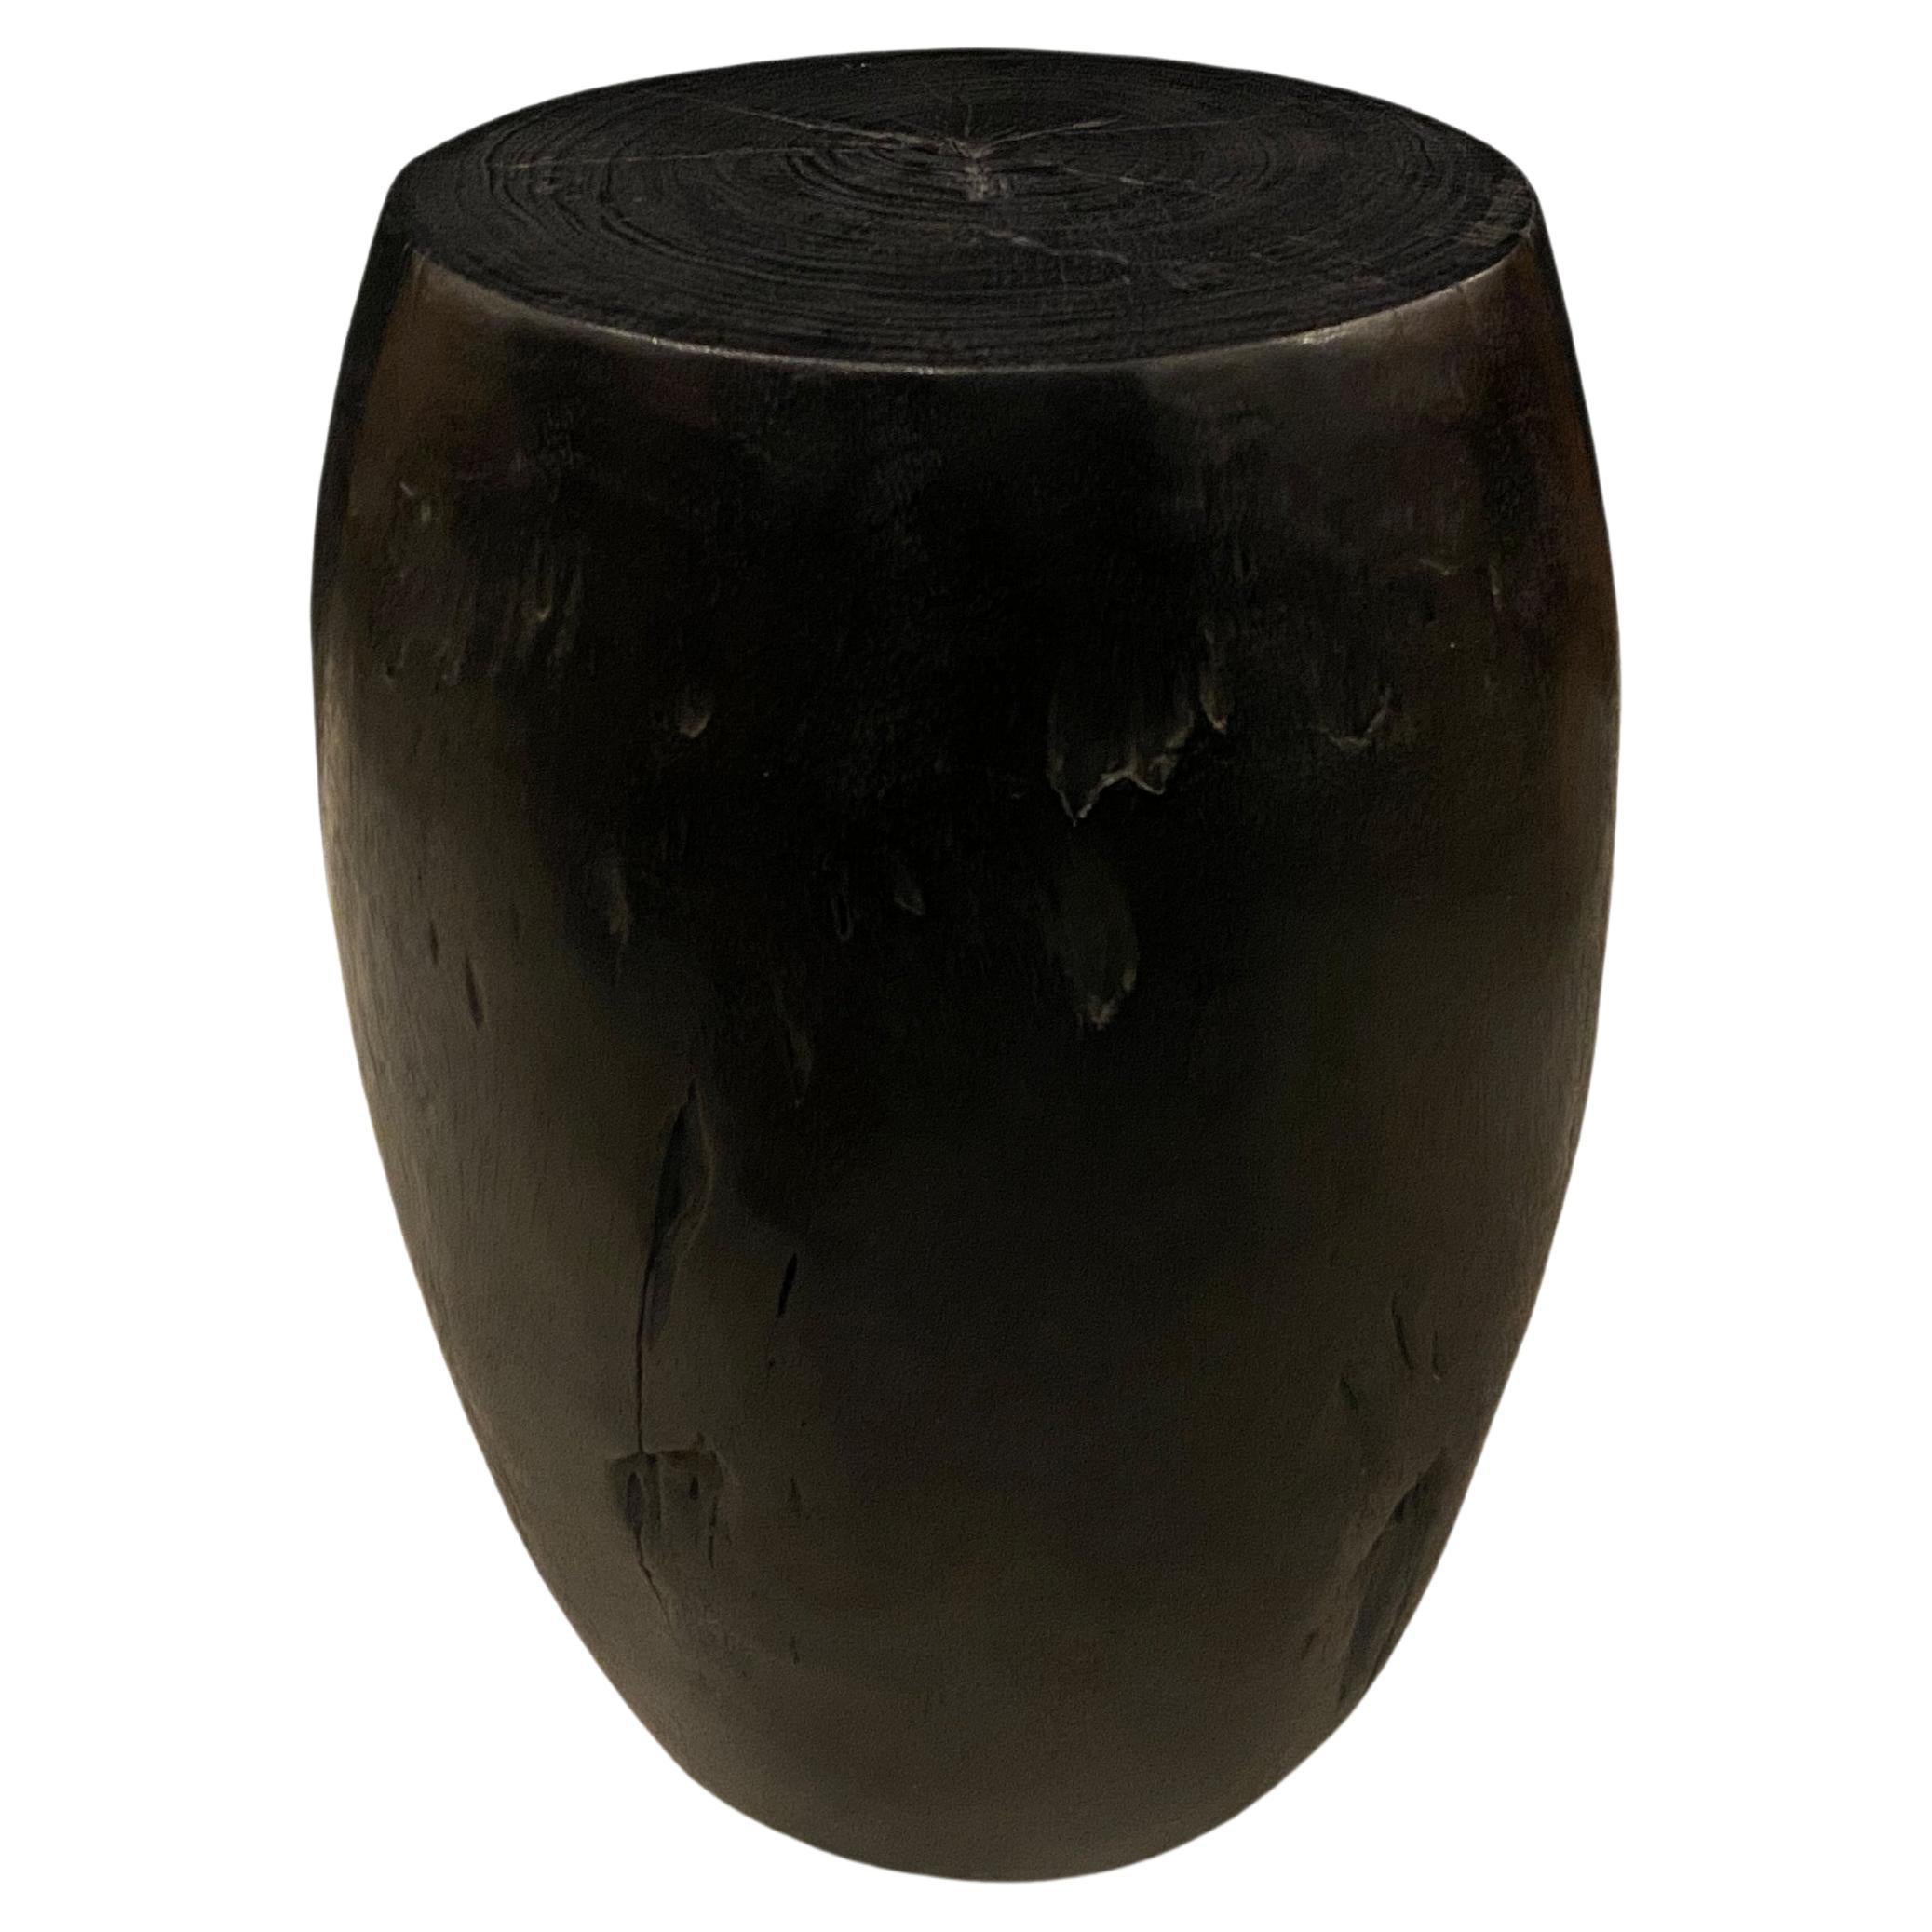 Andrianna Shamaris Polished Drum Shape Side Table or Stool For Sale